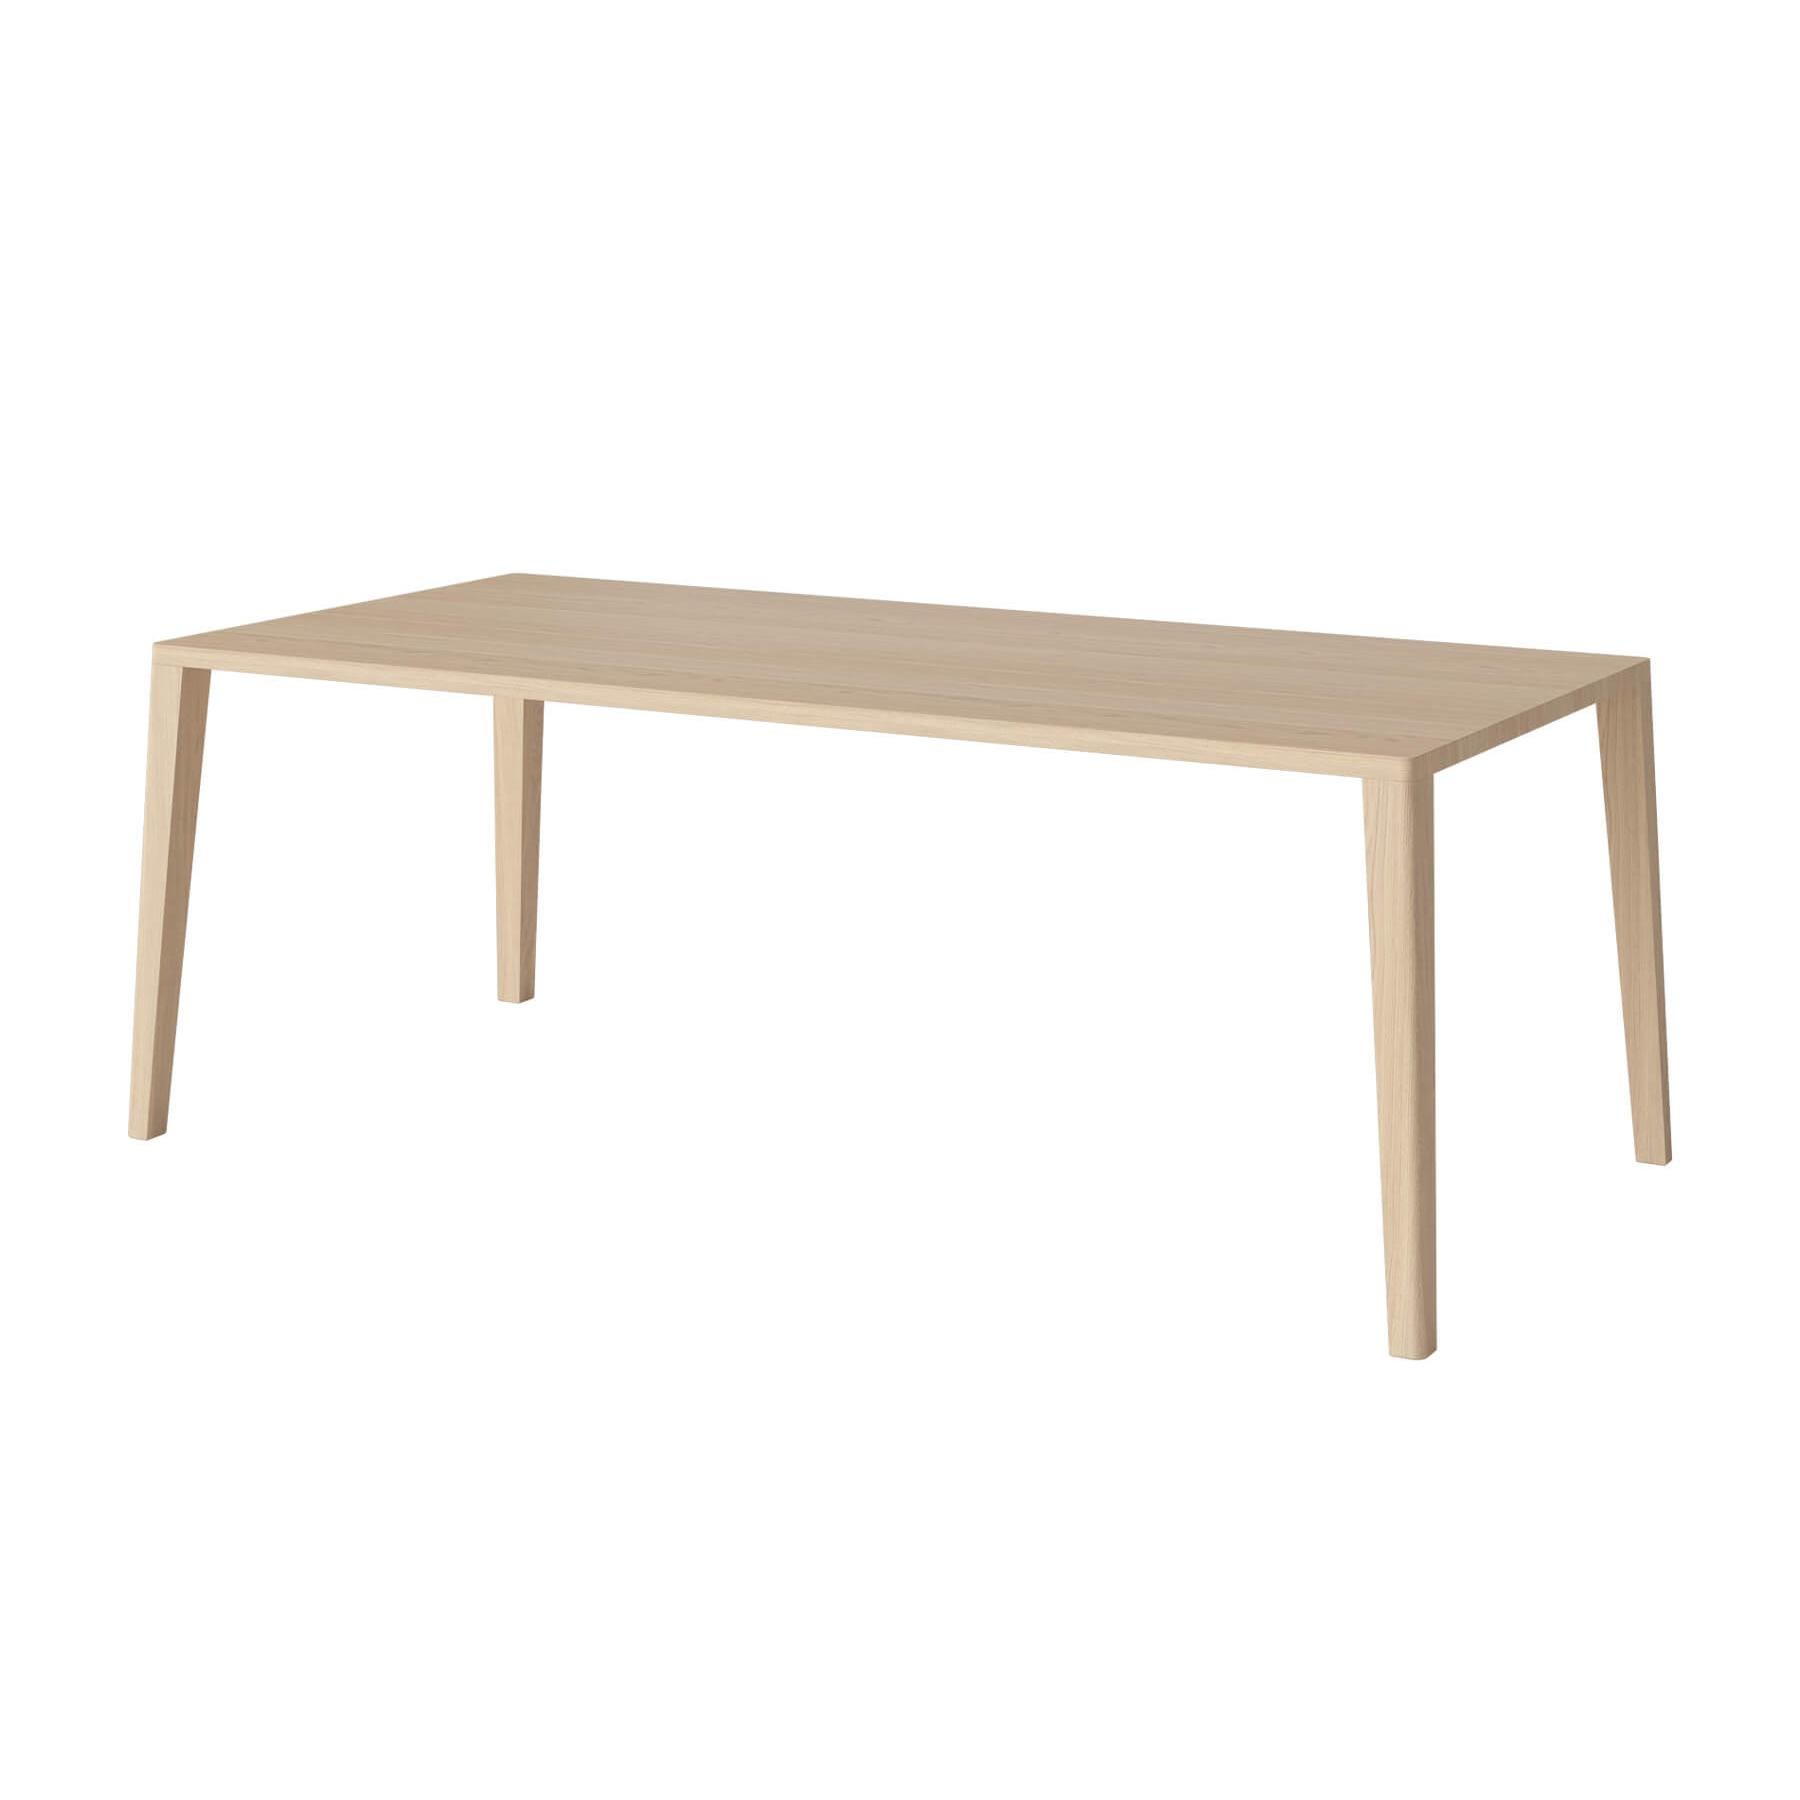 Bolia Graceful Dining Table 220 X 95cm White Oiled Legs Without Extension Leaves Light Wood Designer Furniture From Holloways Of Ludlow